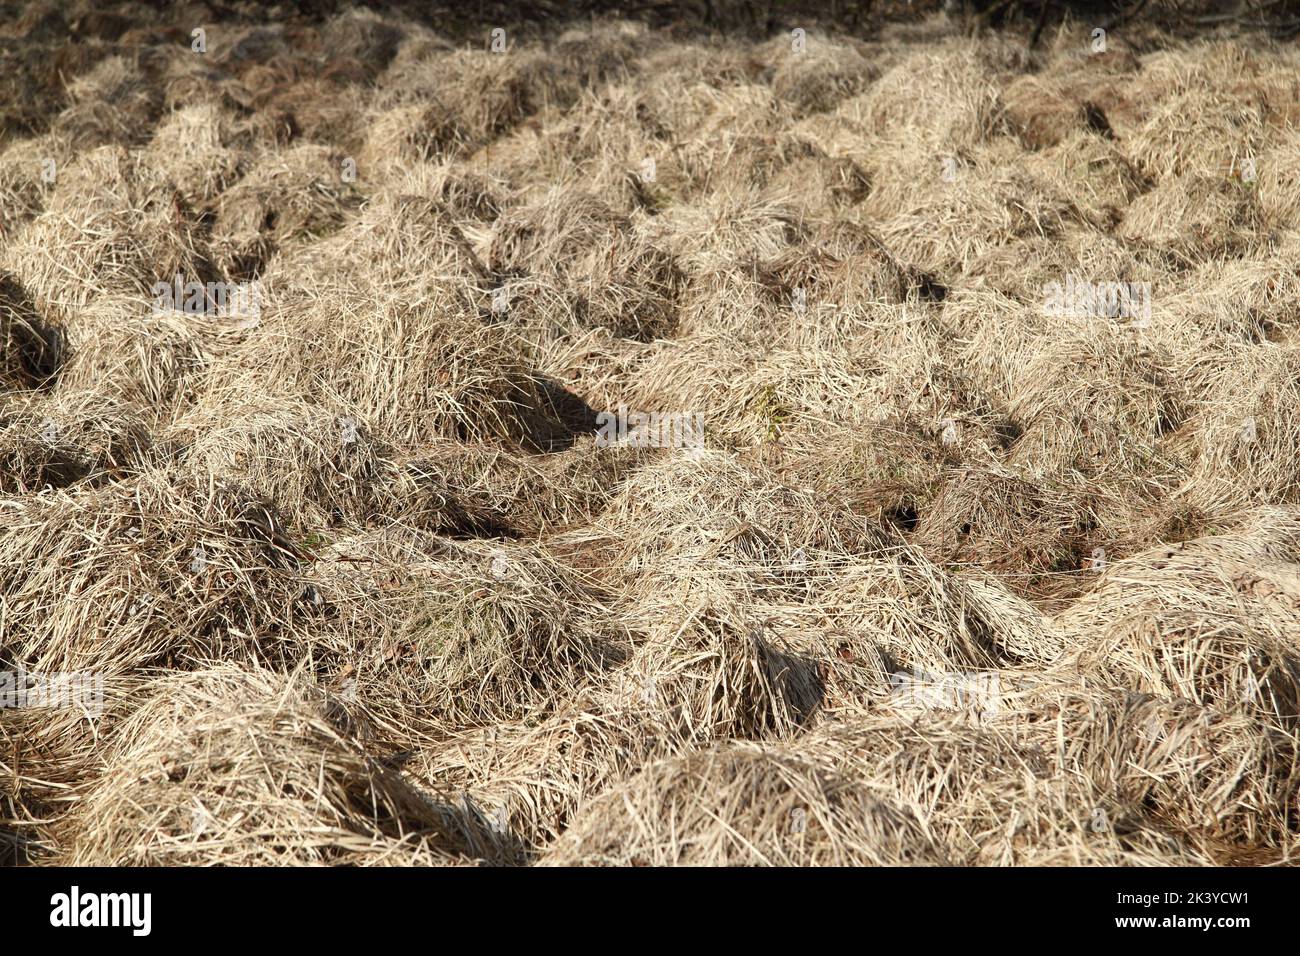 Dried up grass, shaped into many small hills Stock Photo